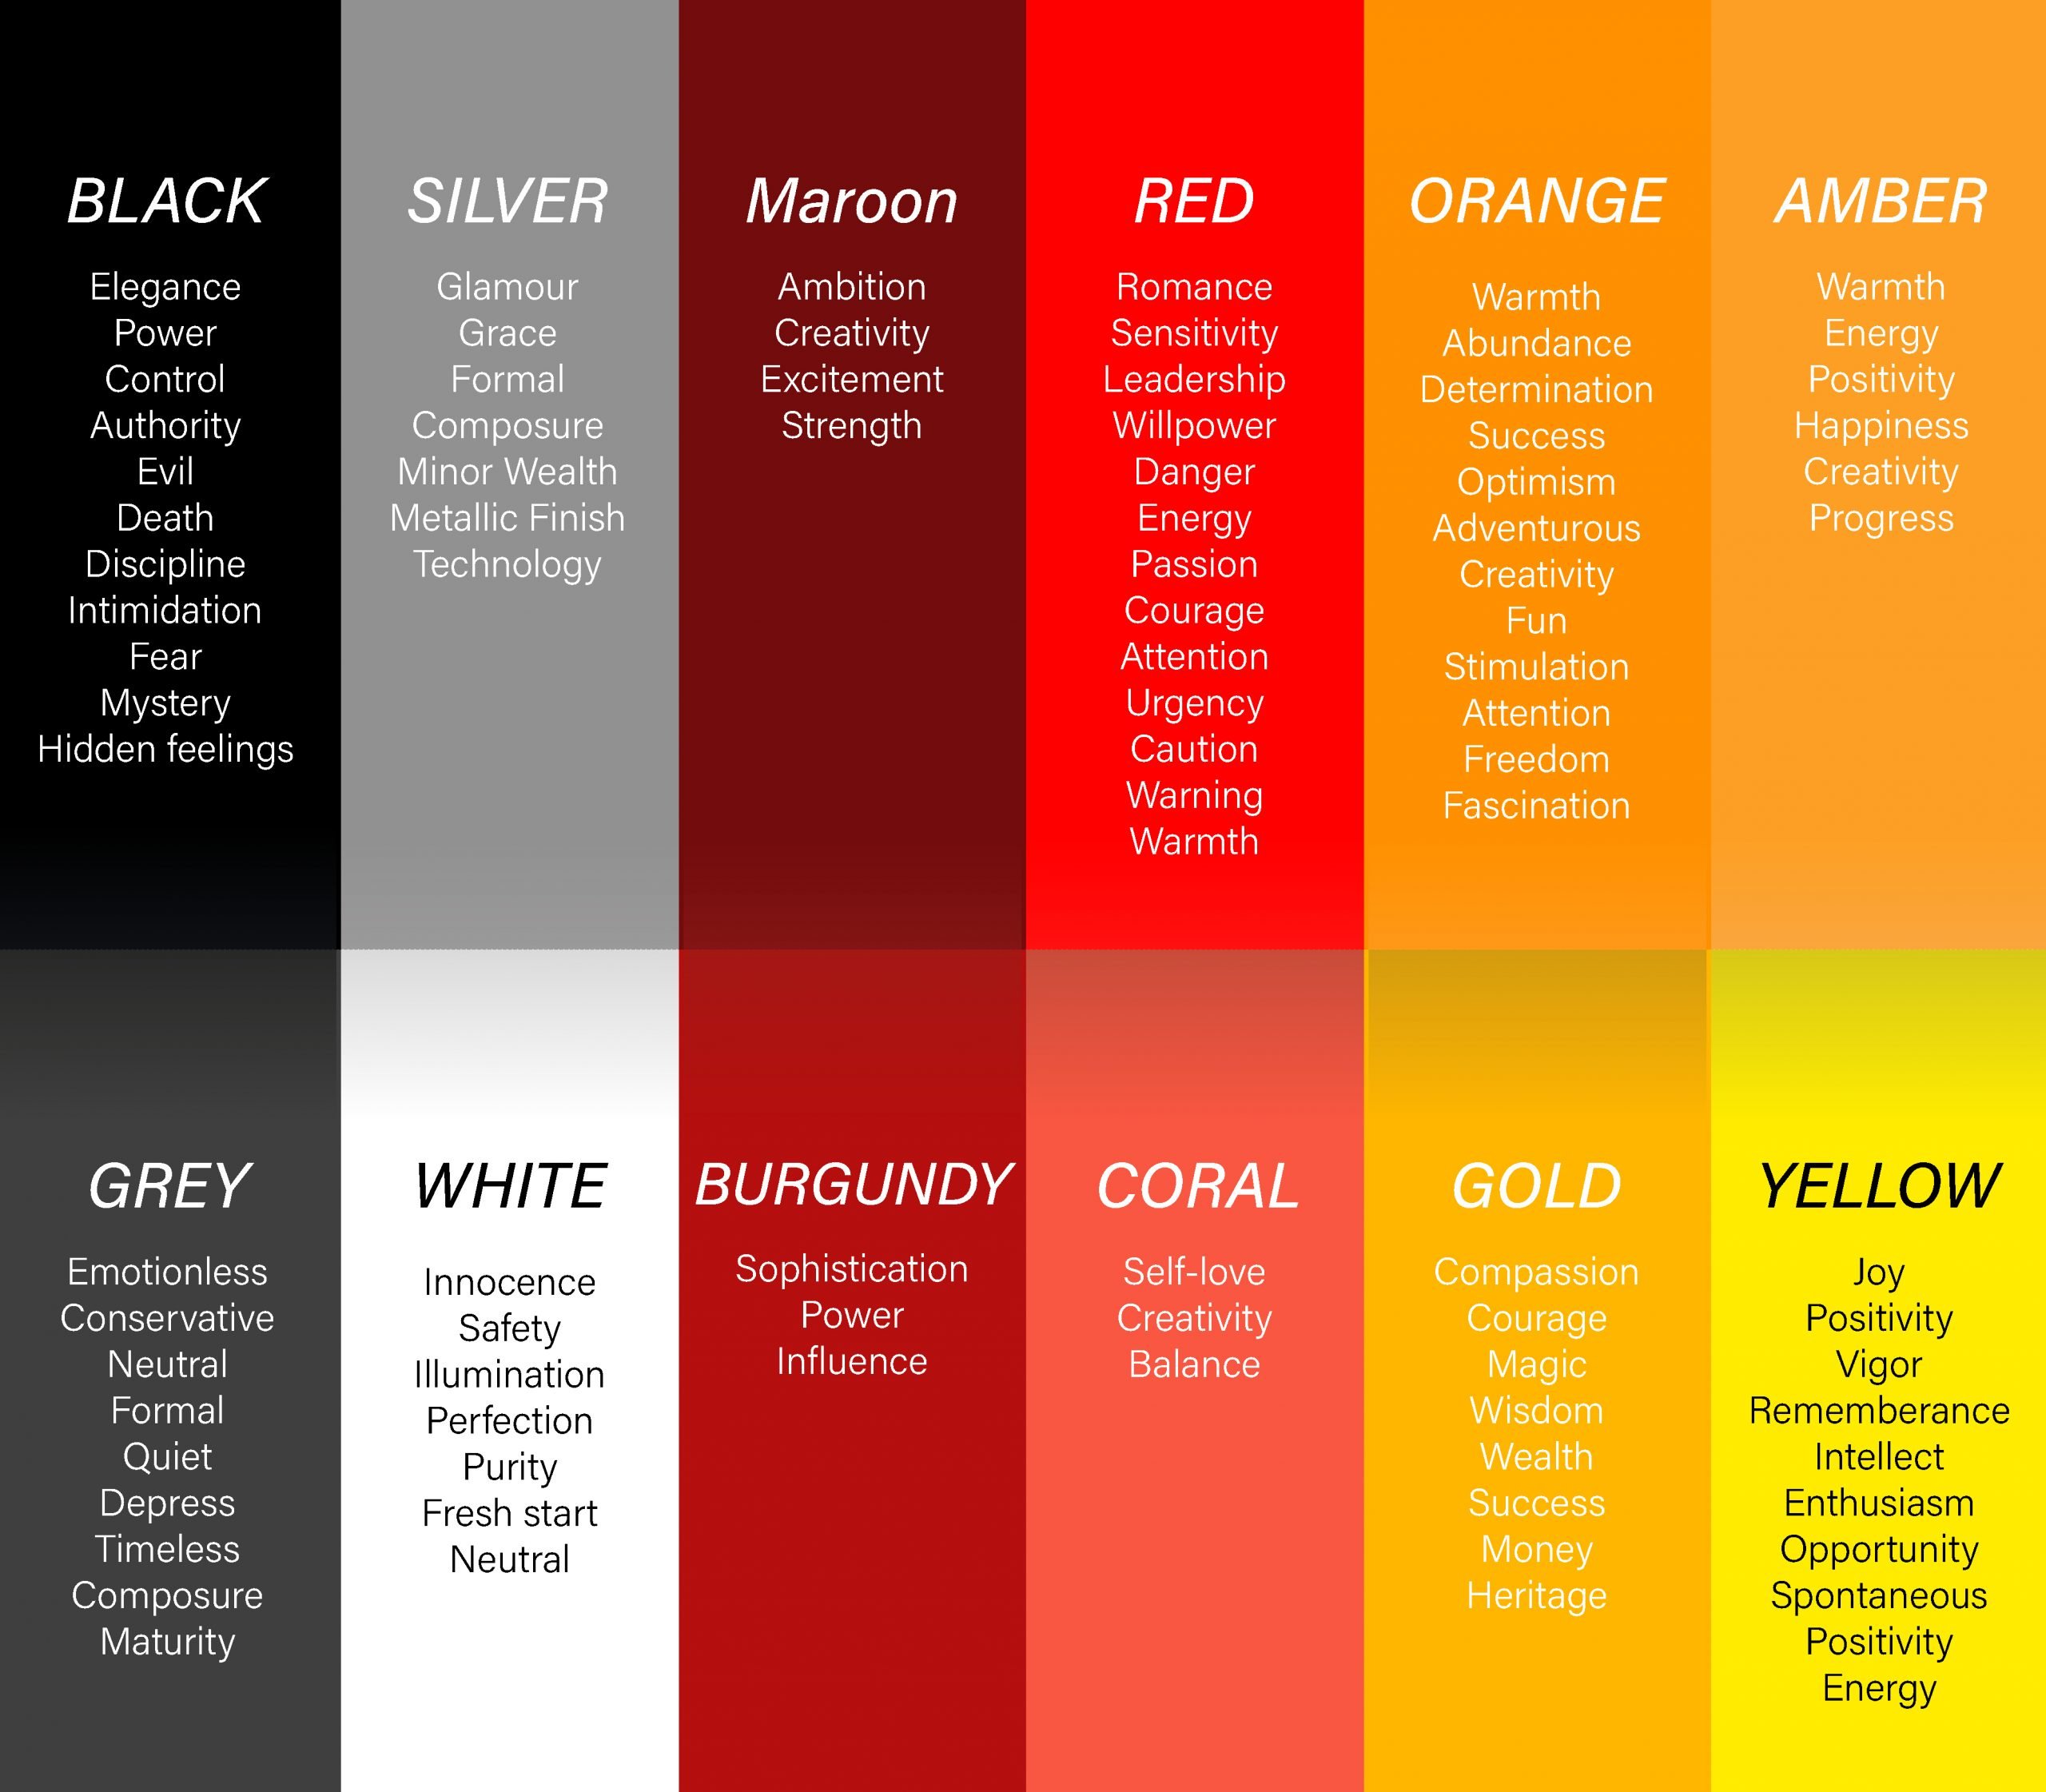 A graphic of "color psychology", indicating traits and characteristics which are commonly associated with certain colors in the red, orange, yellow and grey range.